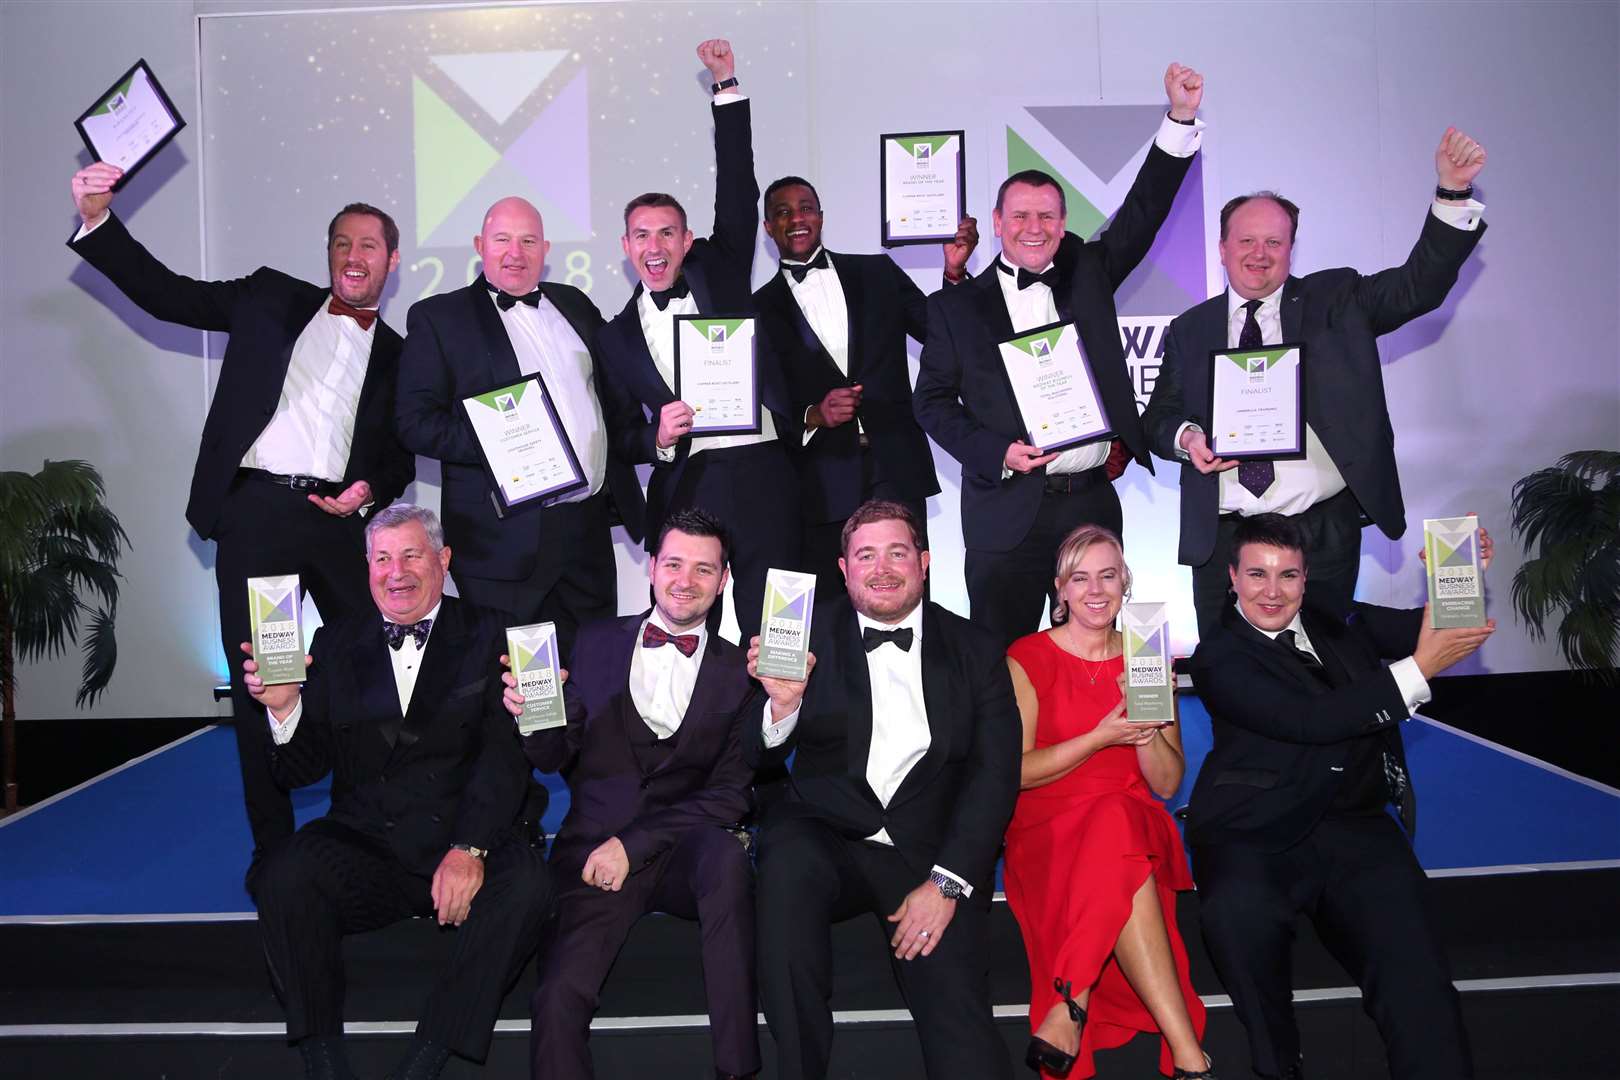 Award winners from Medway Business Awards last year